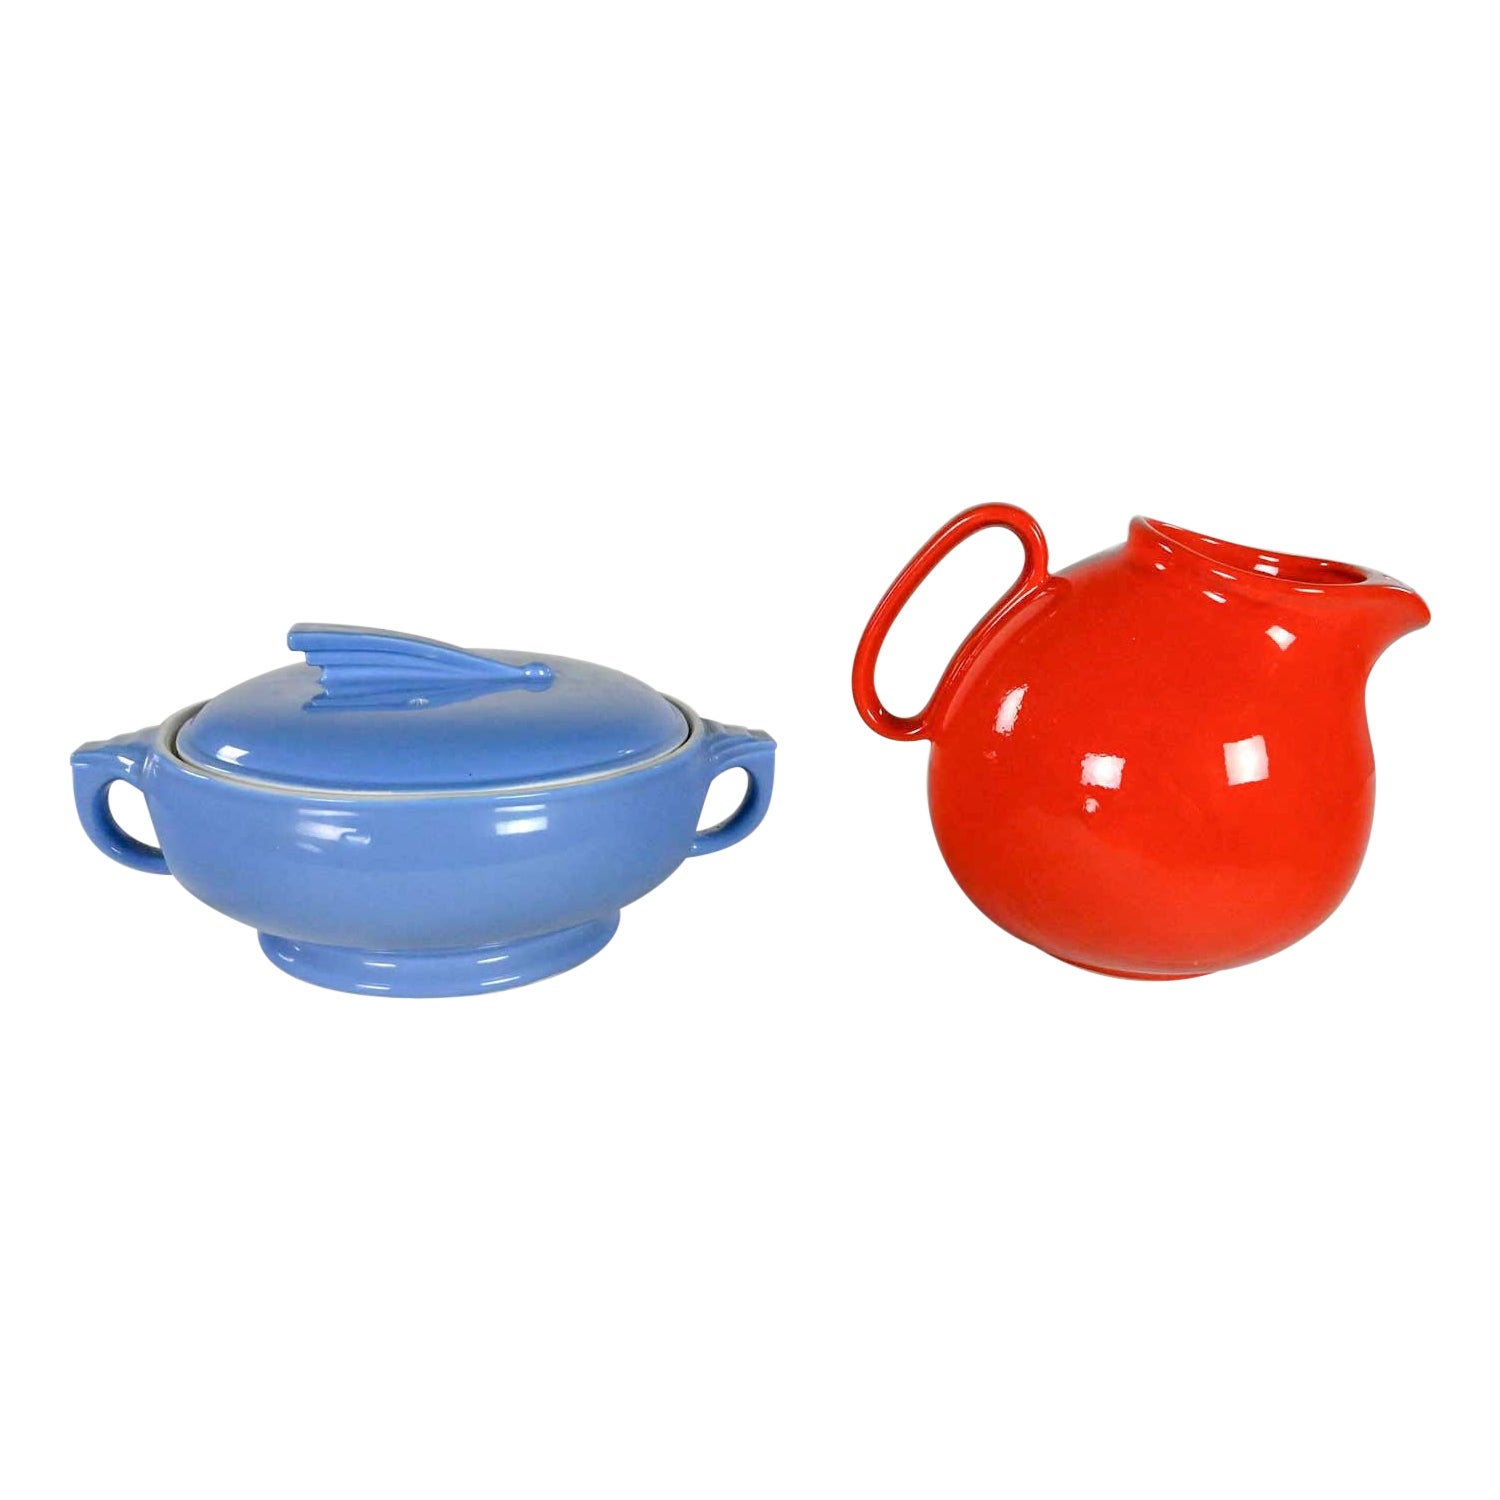 Vintage Red Pitcher by Waechtersbach Germany & Blue Hall Sundial Casserole Dish For Sale